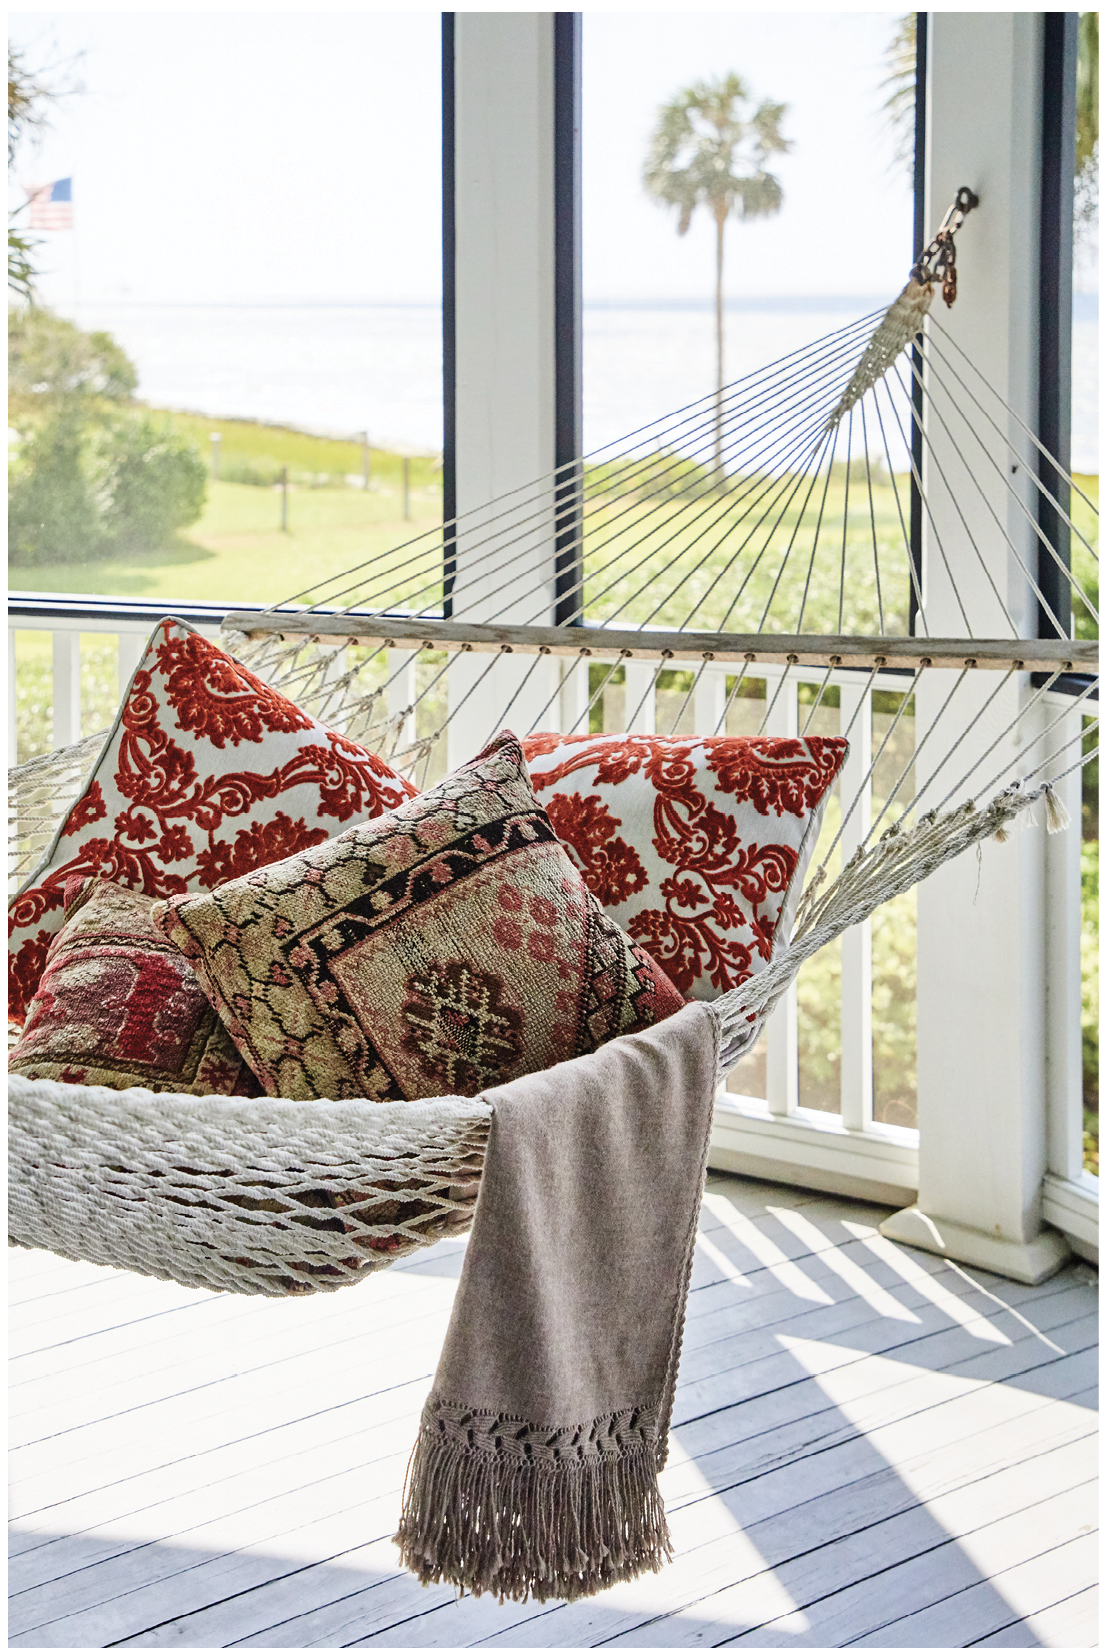 Plump pillows and a soft throw make this hammock an enviable post-meal napping spot.